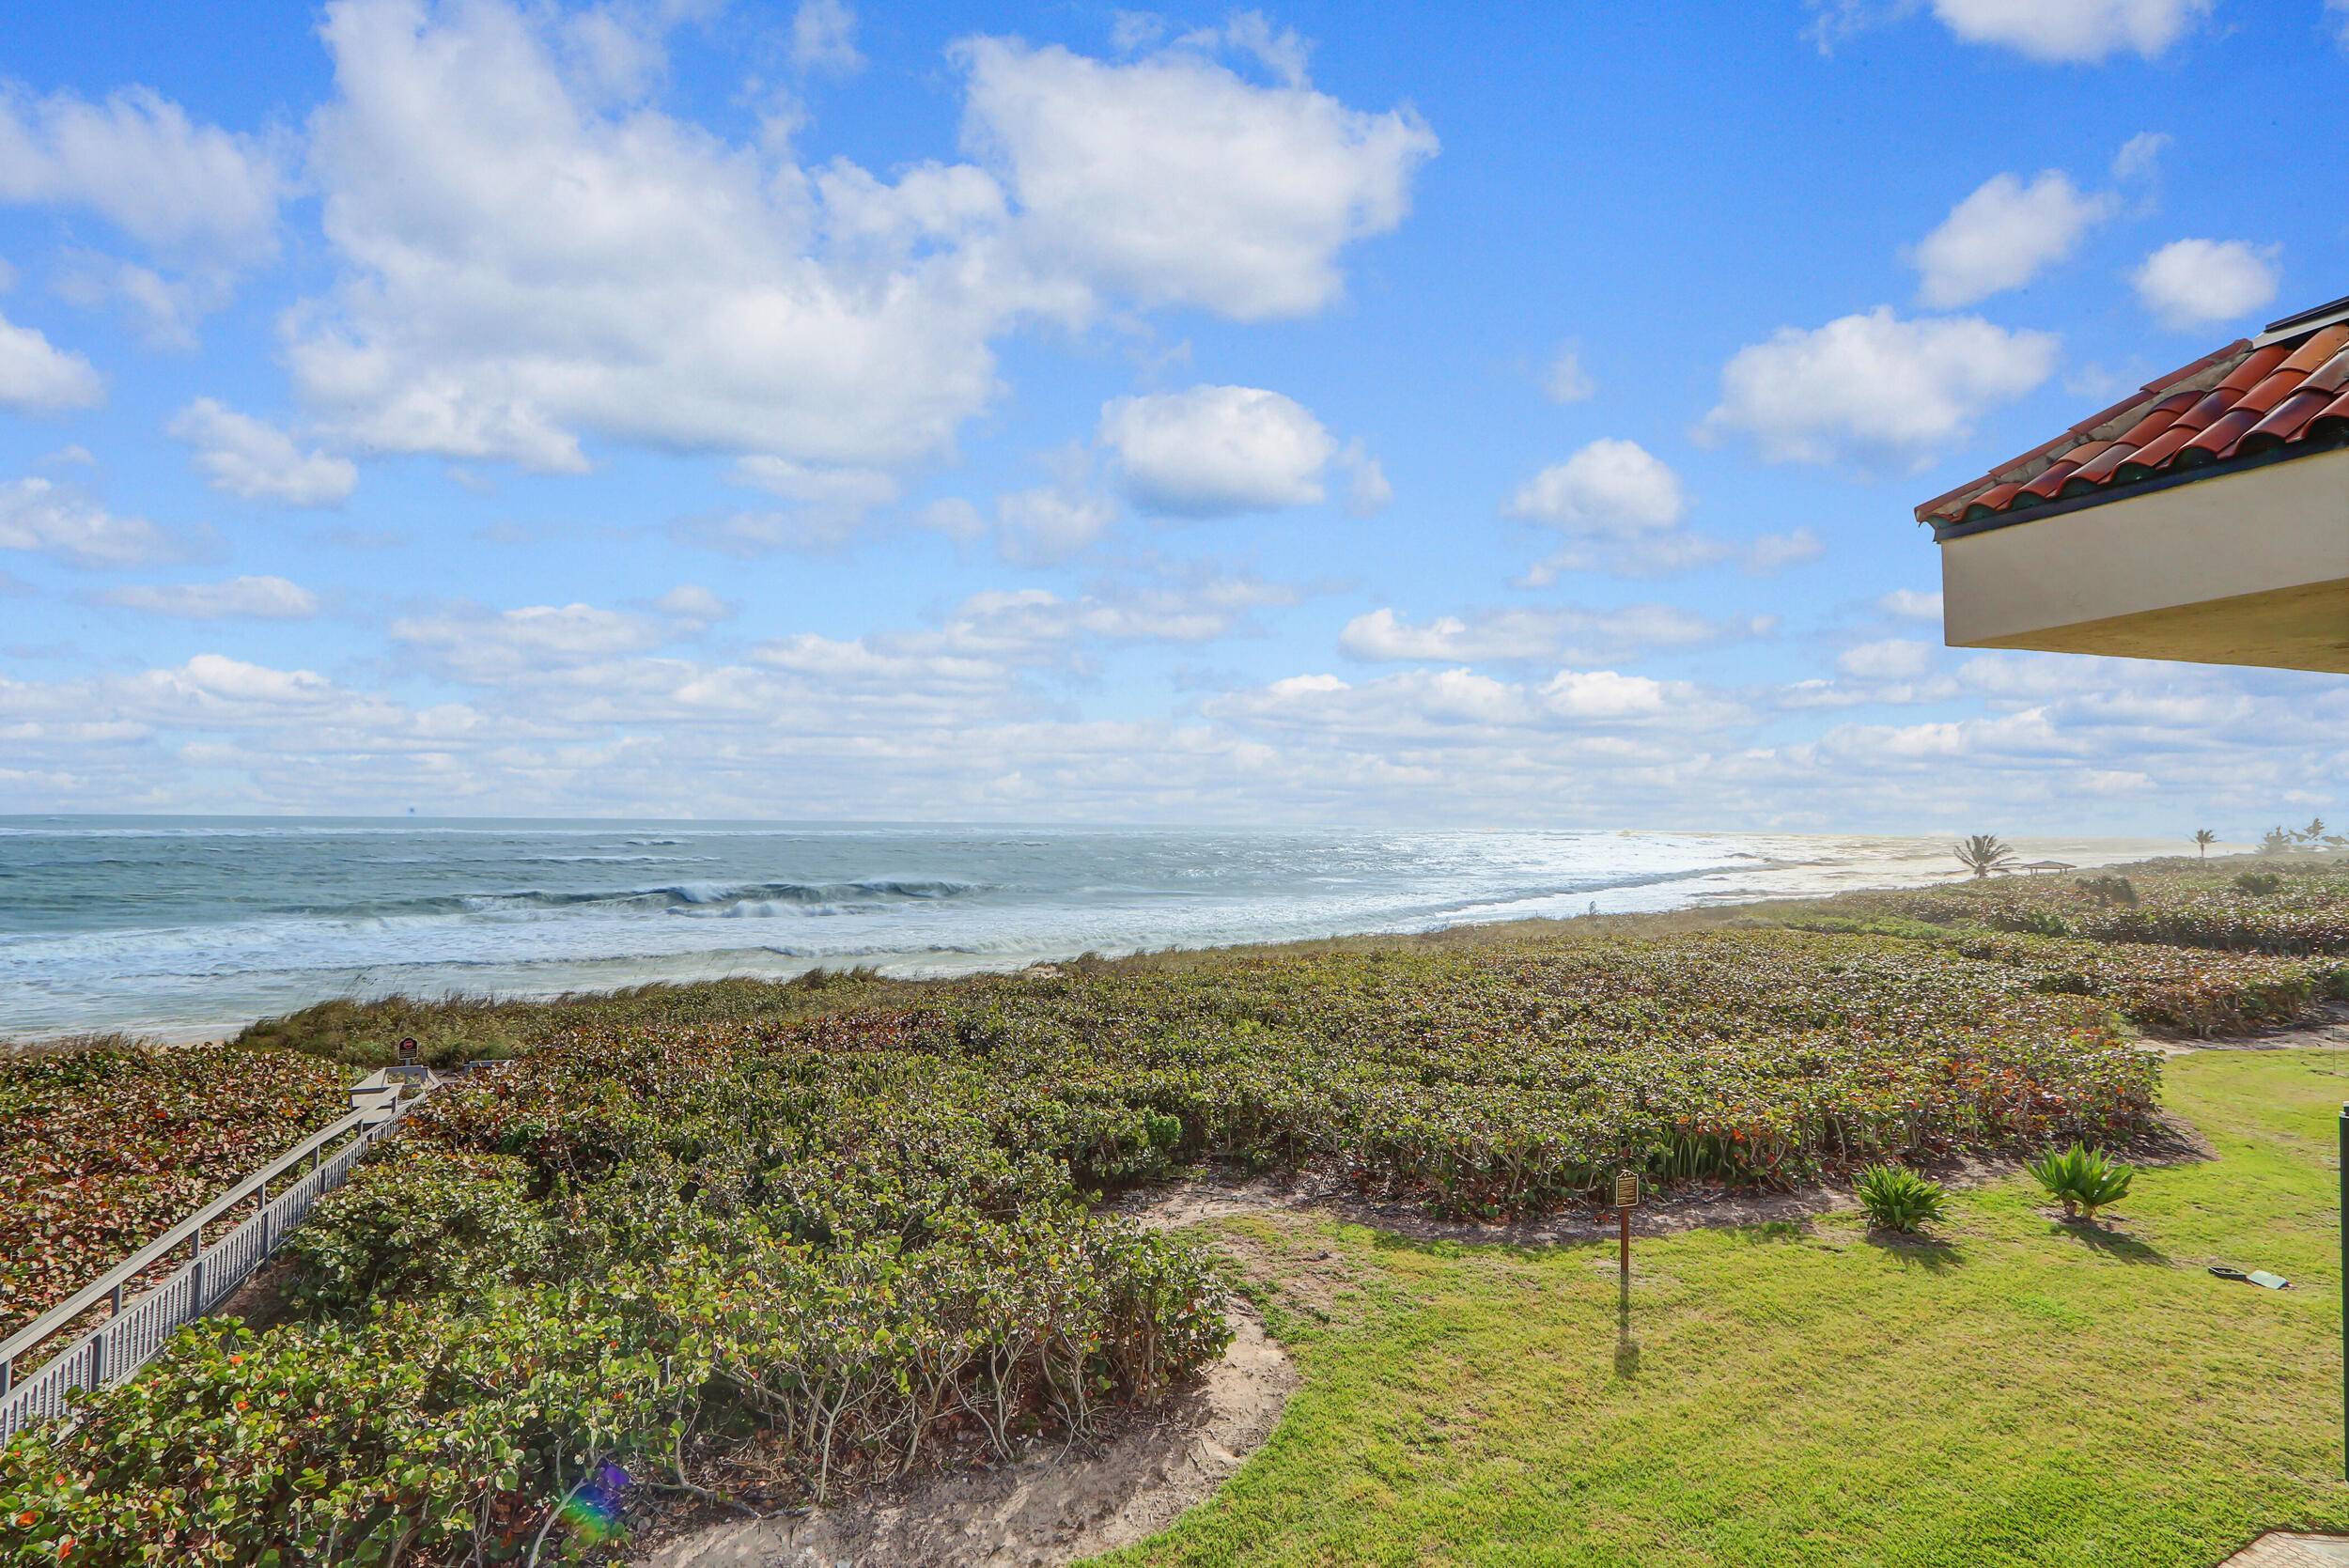 Experience coastal luxury in this breathtaking oceanfront condo unit, where panoramic views of the Ocean welcome you upon entry and granting direct access to pristine sandy beaches.